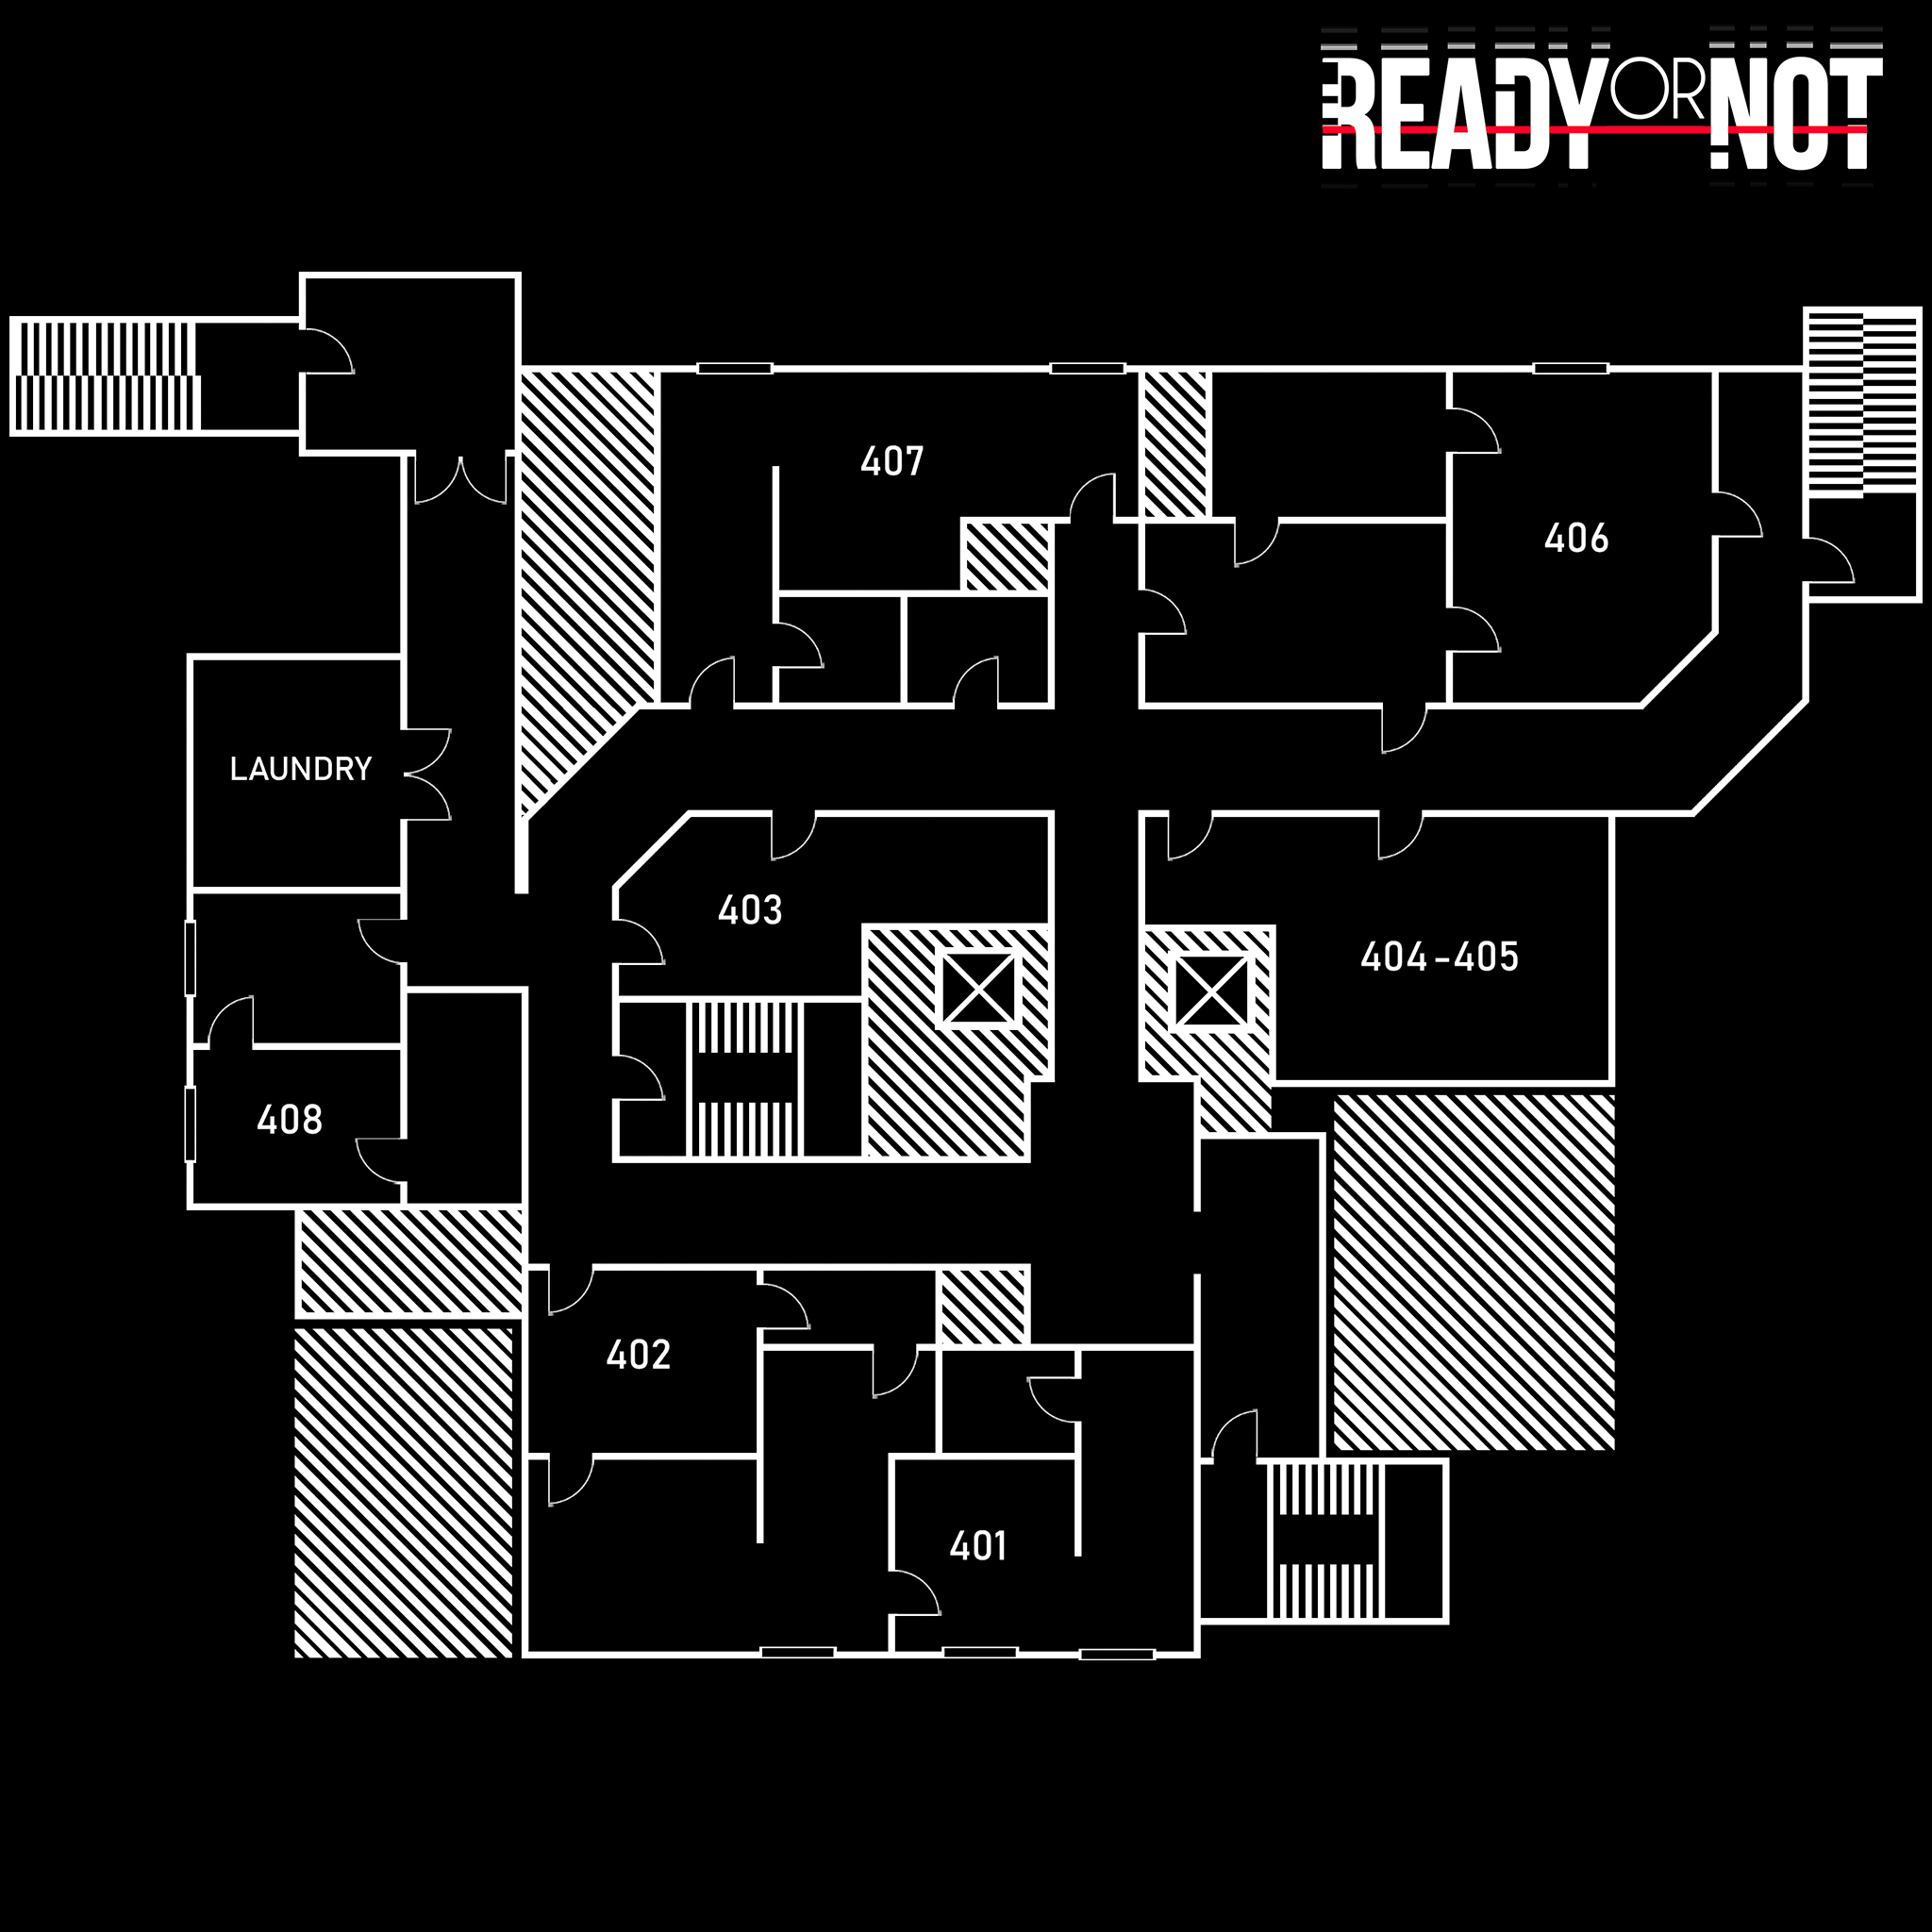 Ready or Not - Map Blueprints - Wenderly Hills Hotel - 060708B